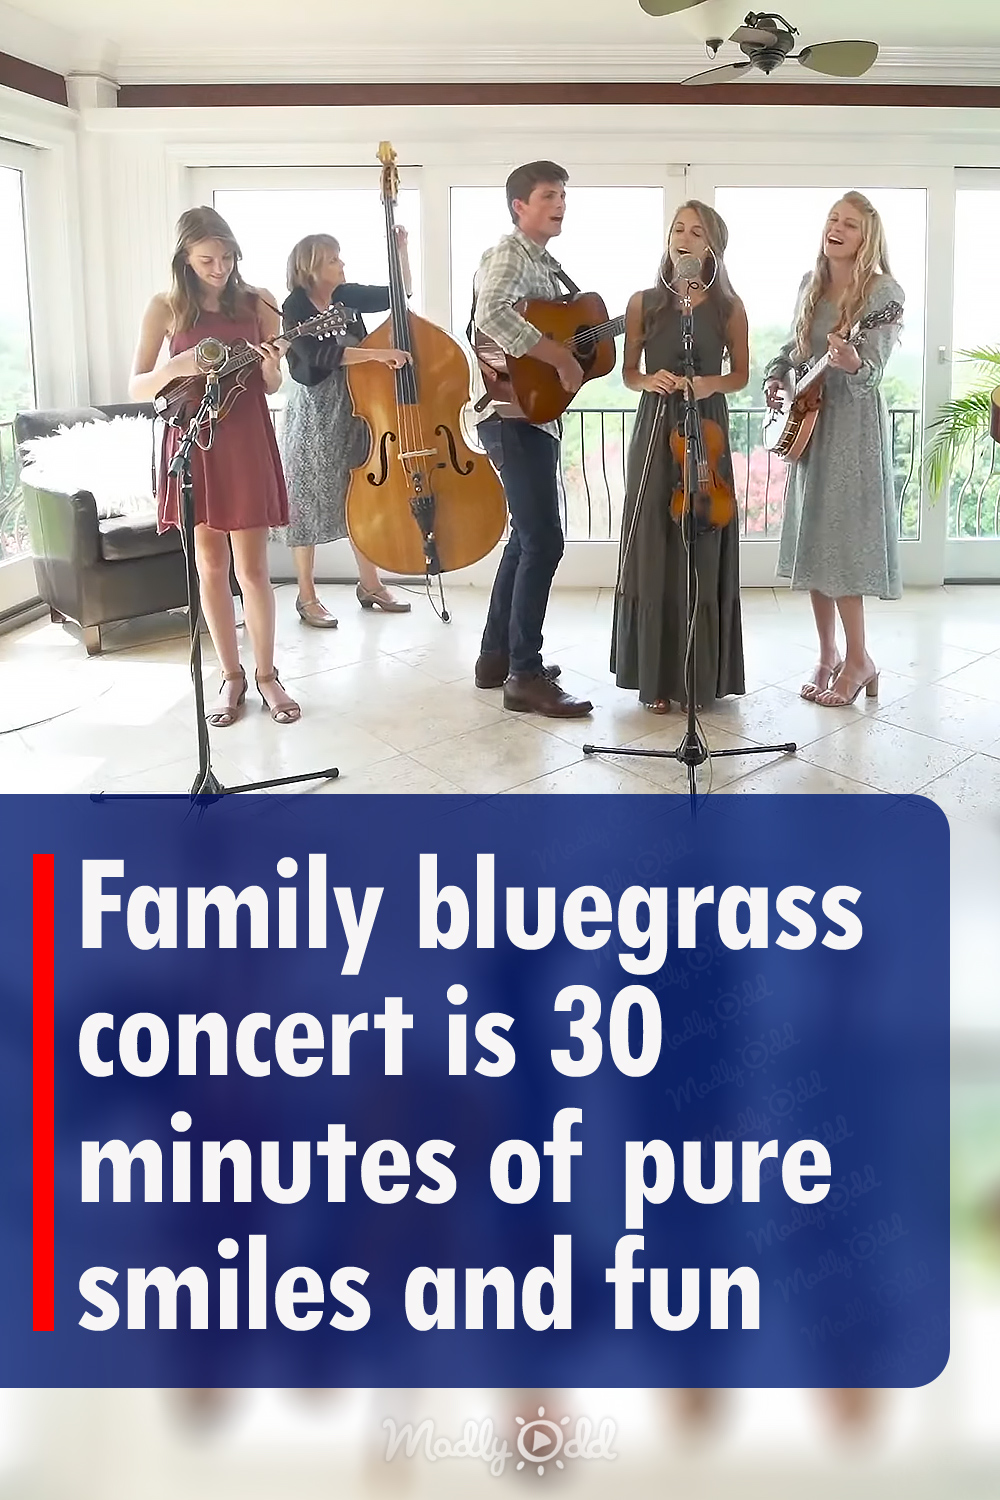 Family bluegrass concert is 30 minutes of pure smiles and fun